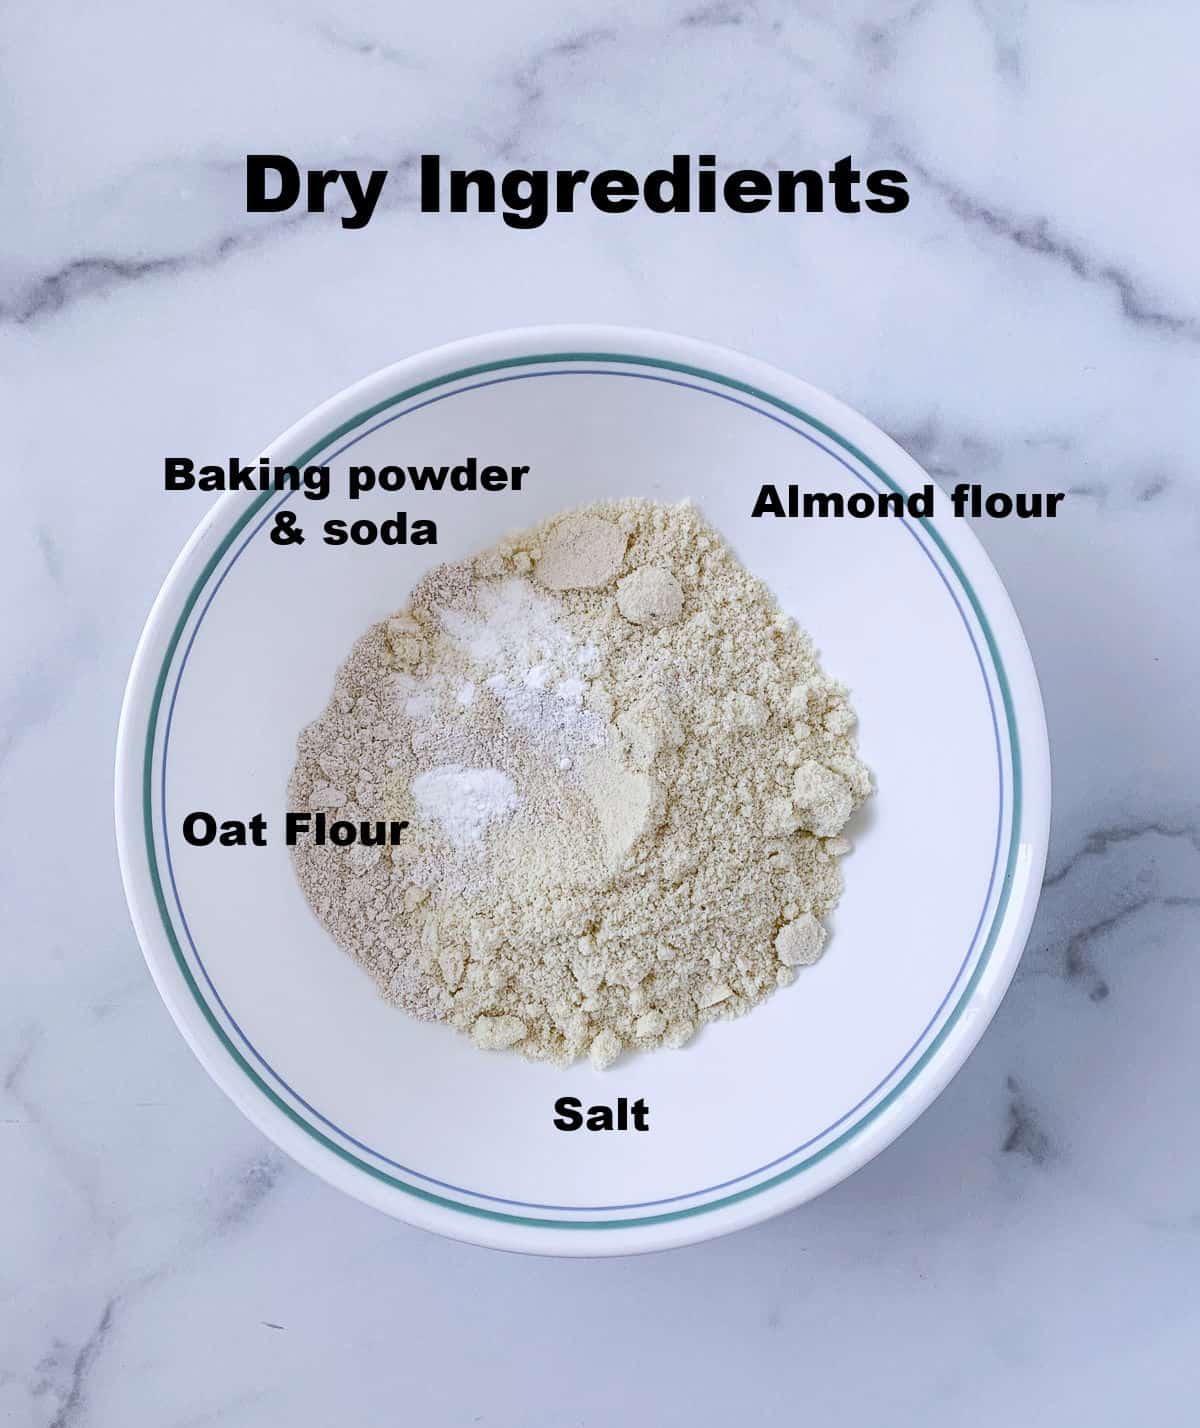 Dry ingredients to make cookies placed in a bowl